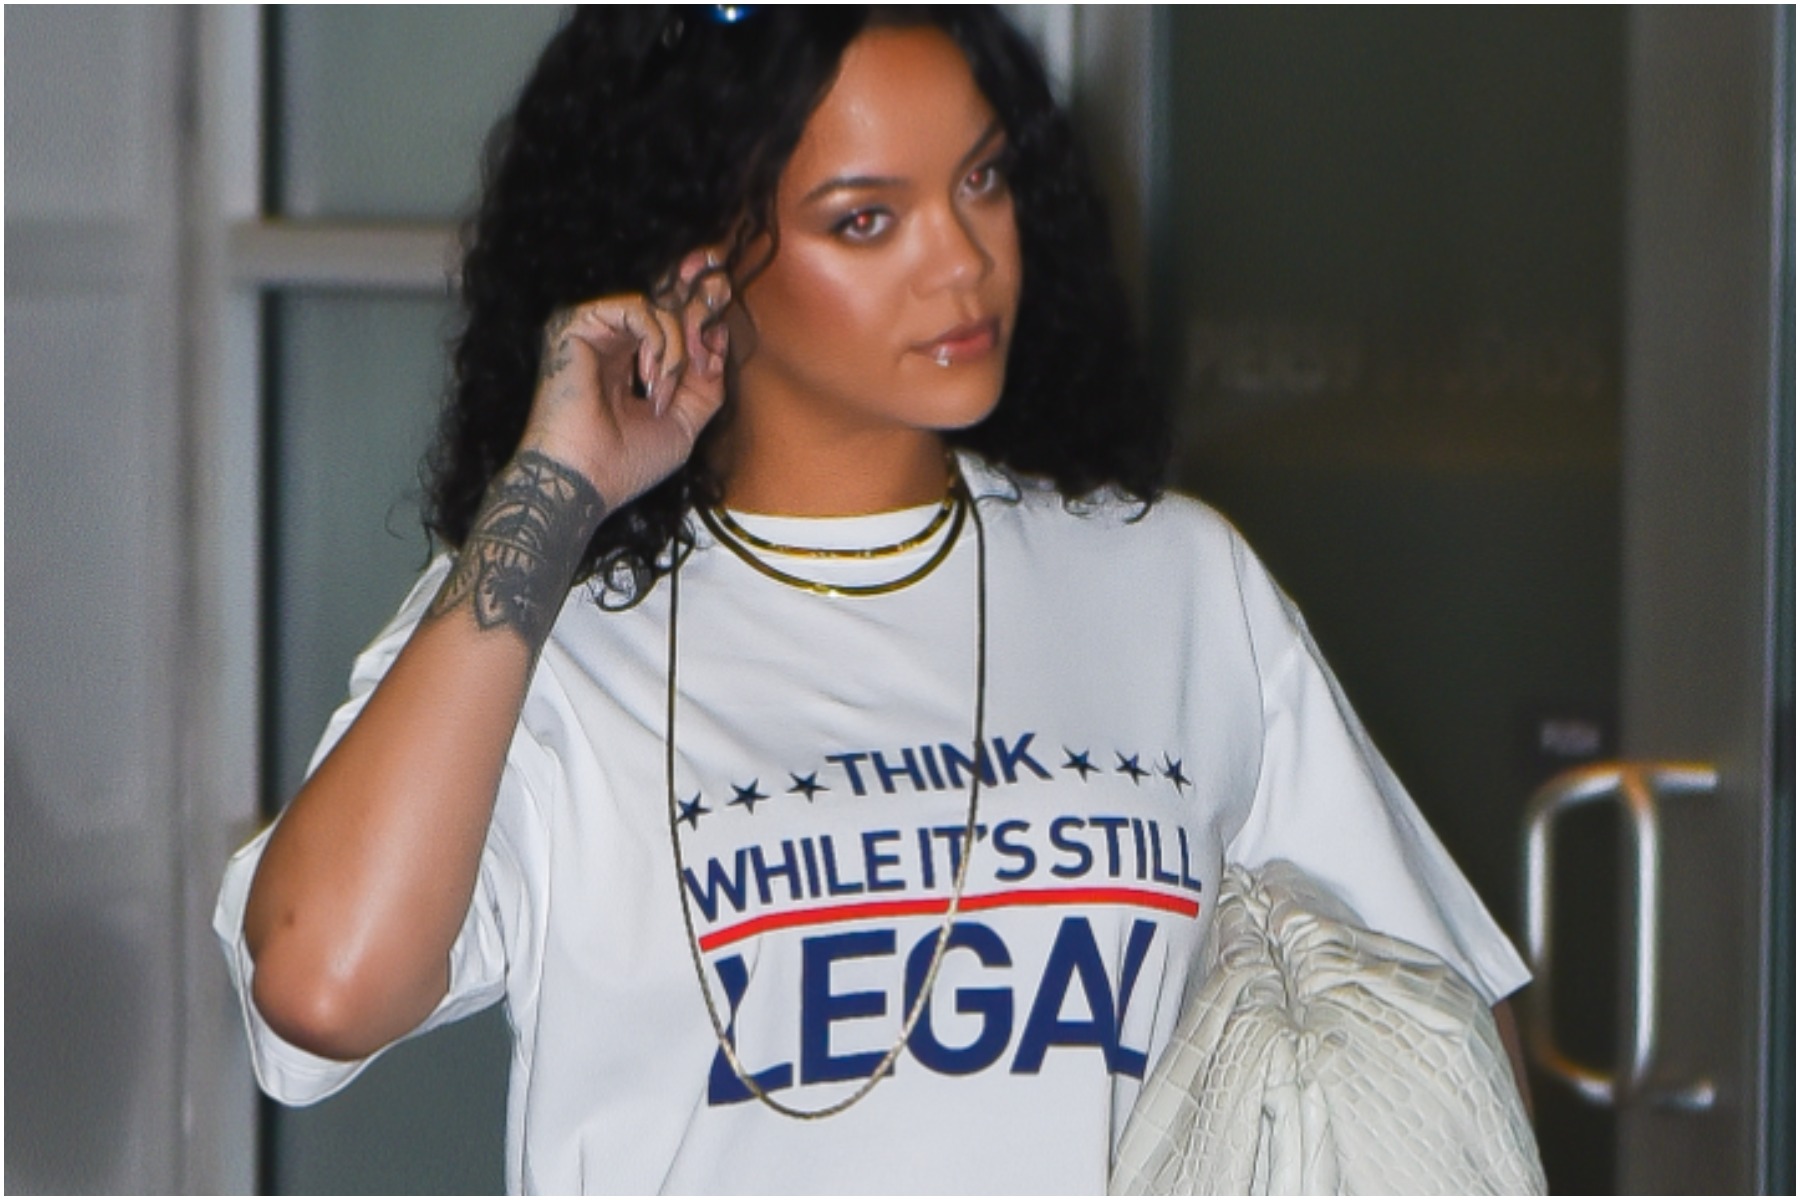 ilt implicitte Association Rihanna Cheered by Conservatives For 'Think While It's Still Legal' T-shirt